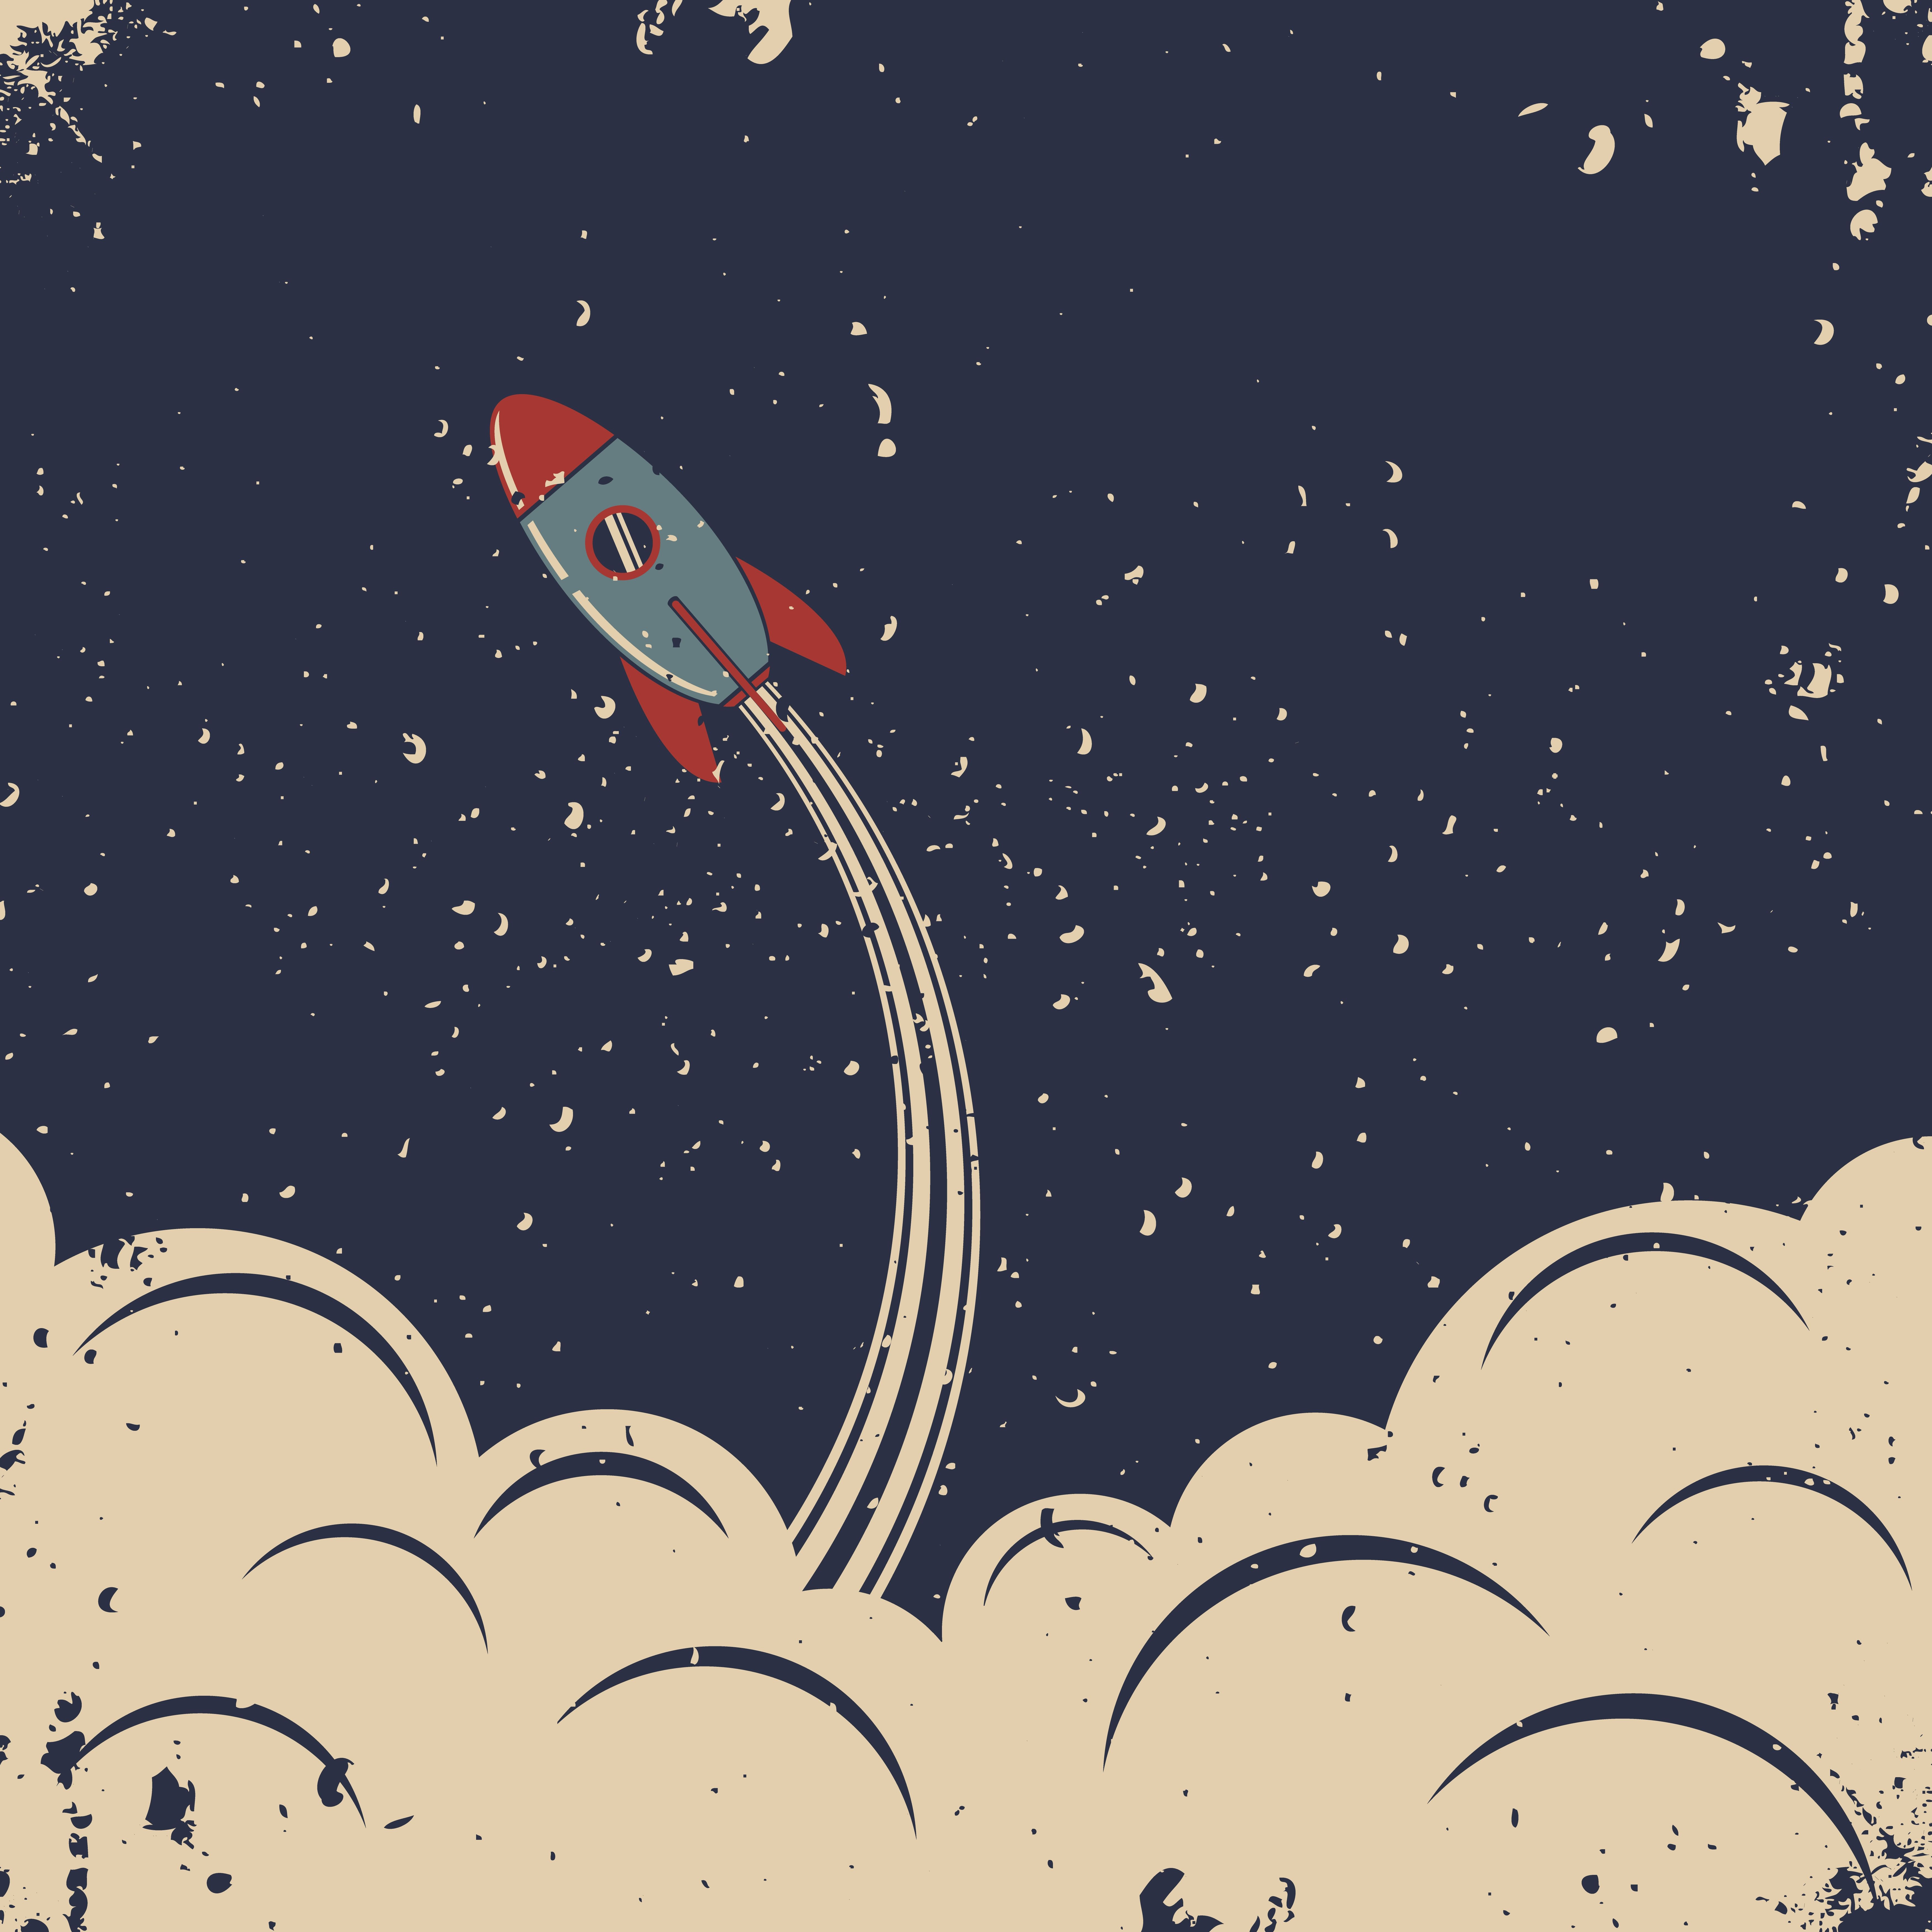 Retro Rocket Launch Wallpaper that's out of this world!